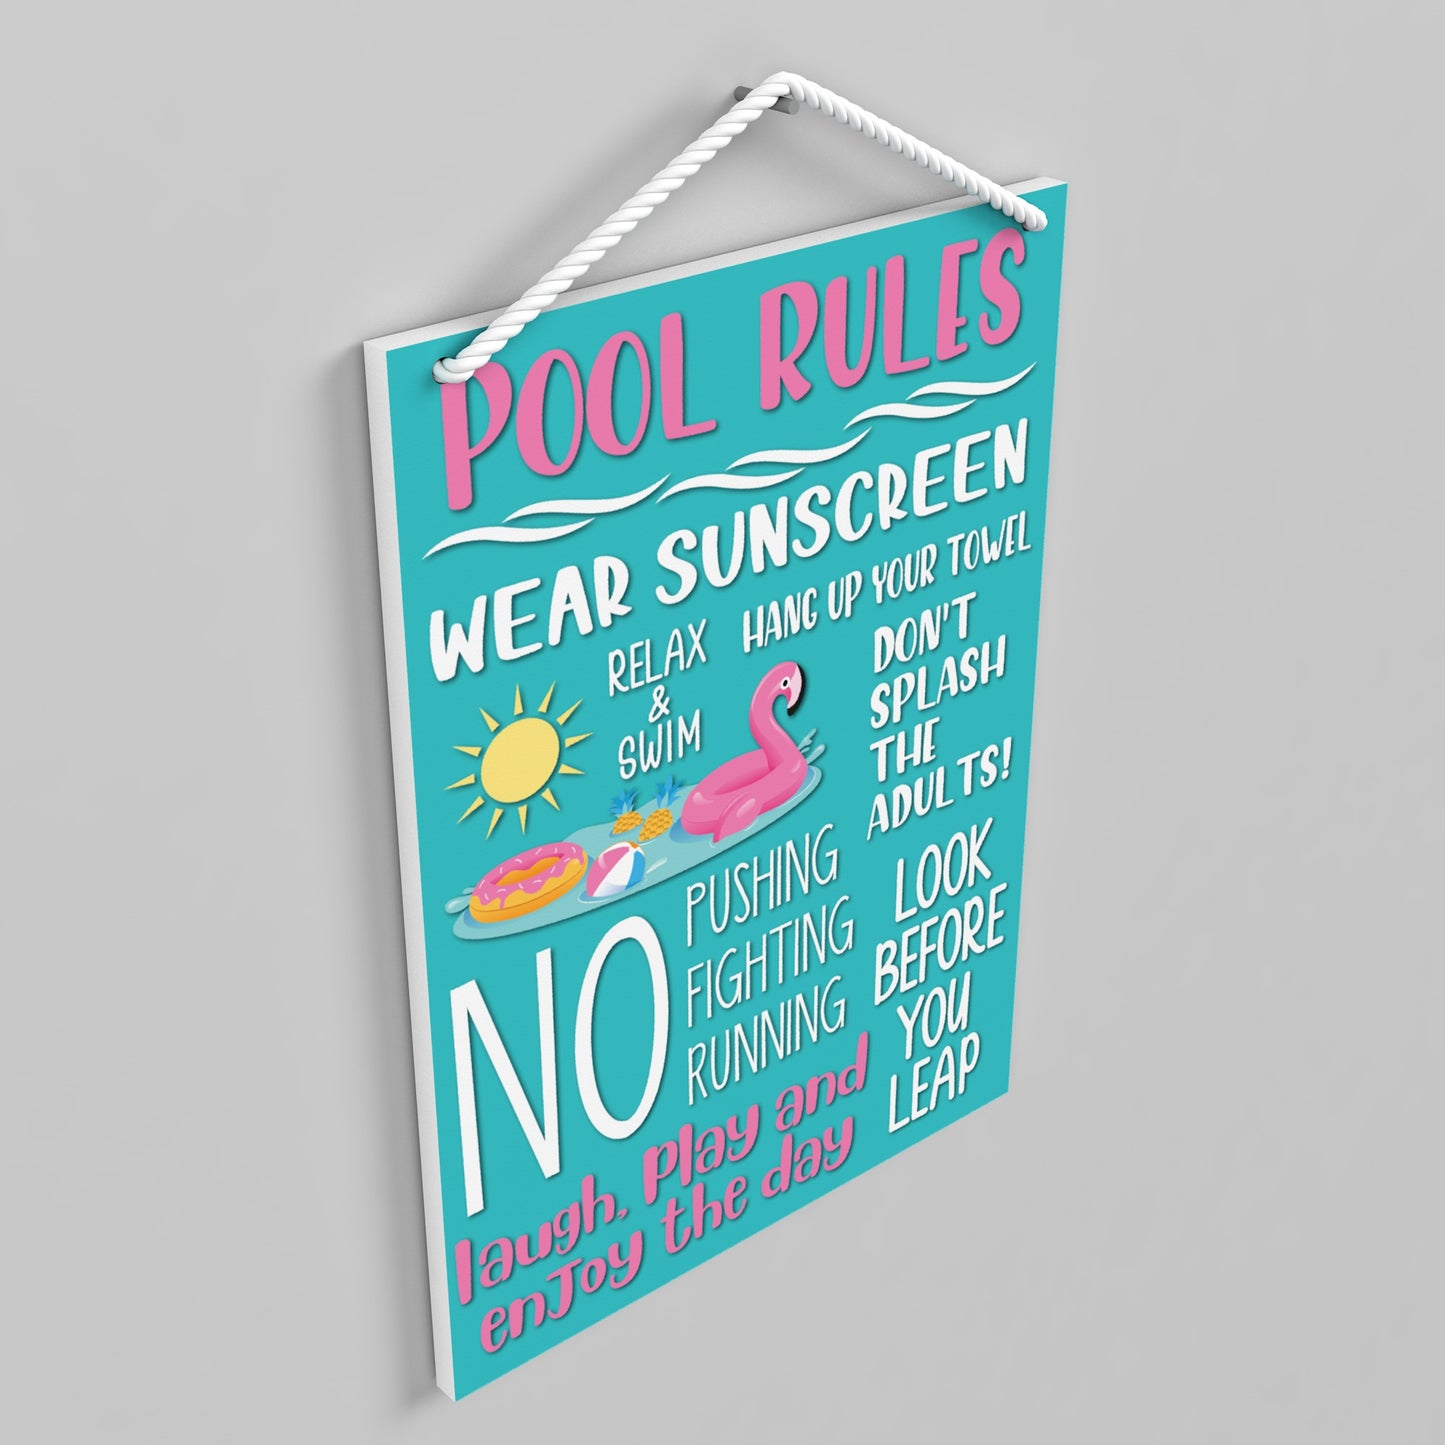 Pool Rules - Outdoor Sign